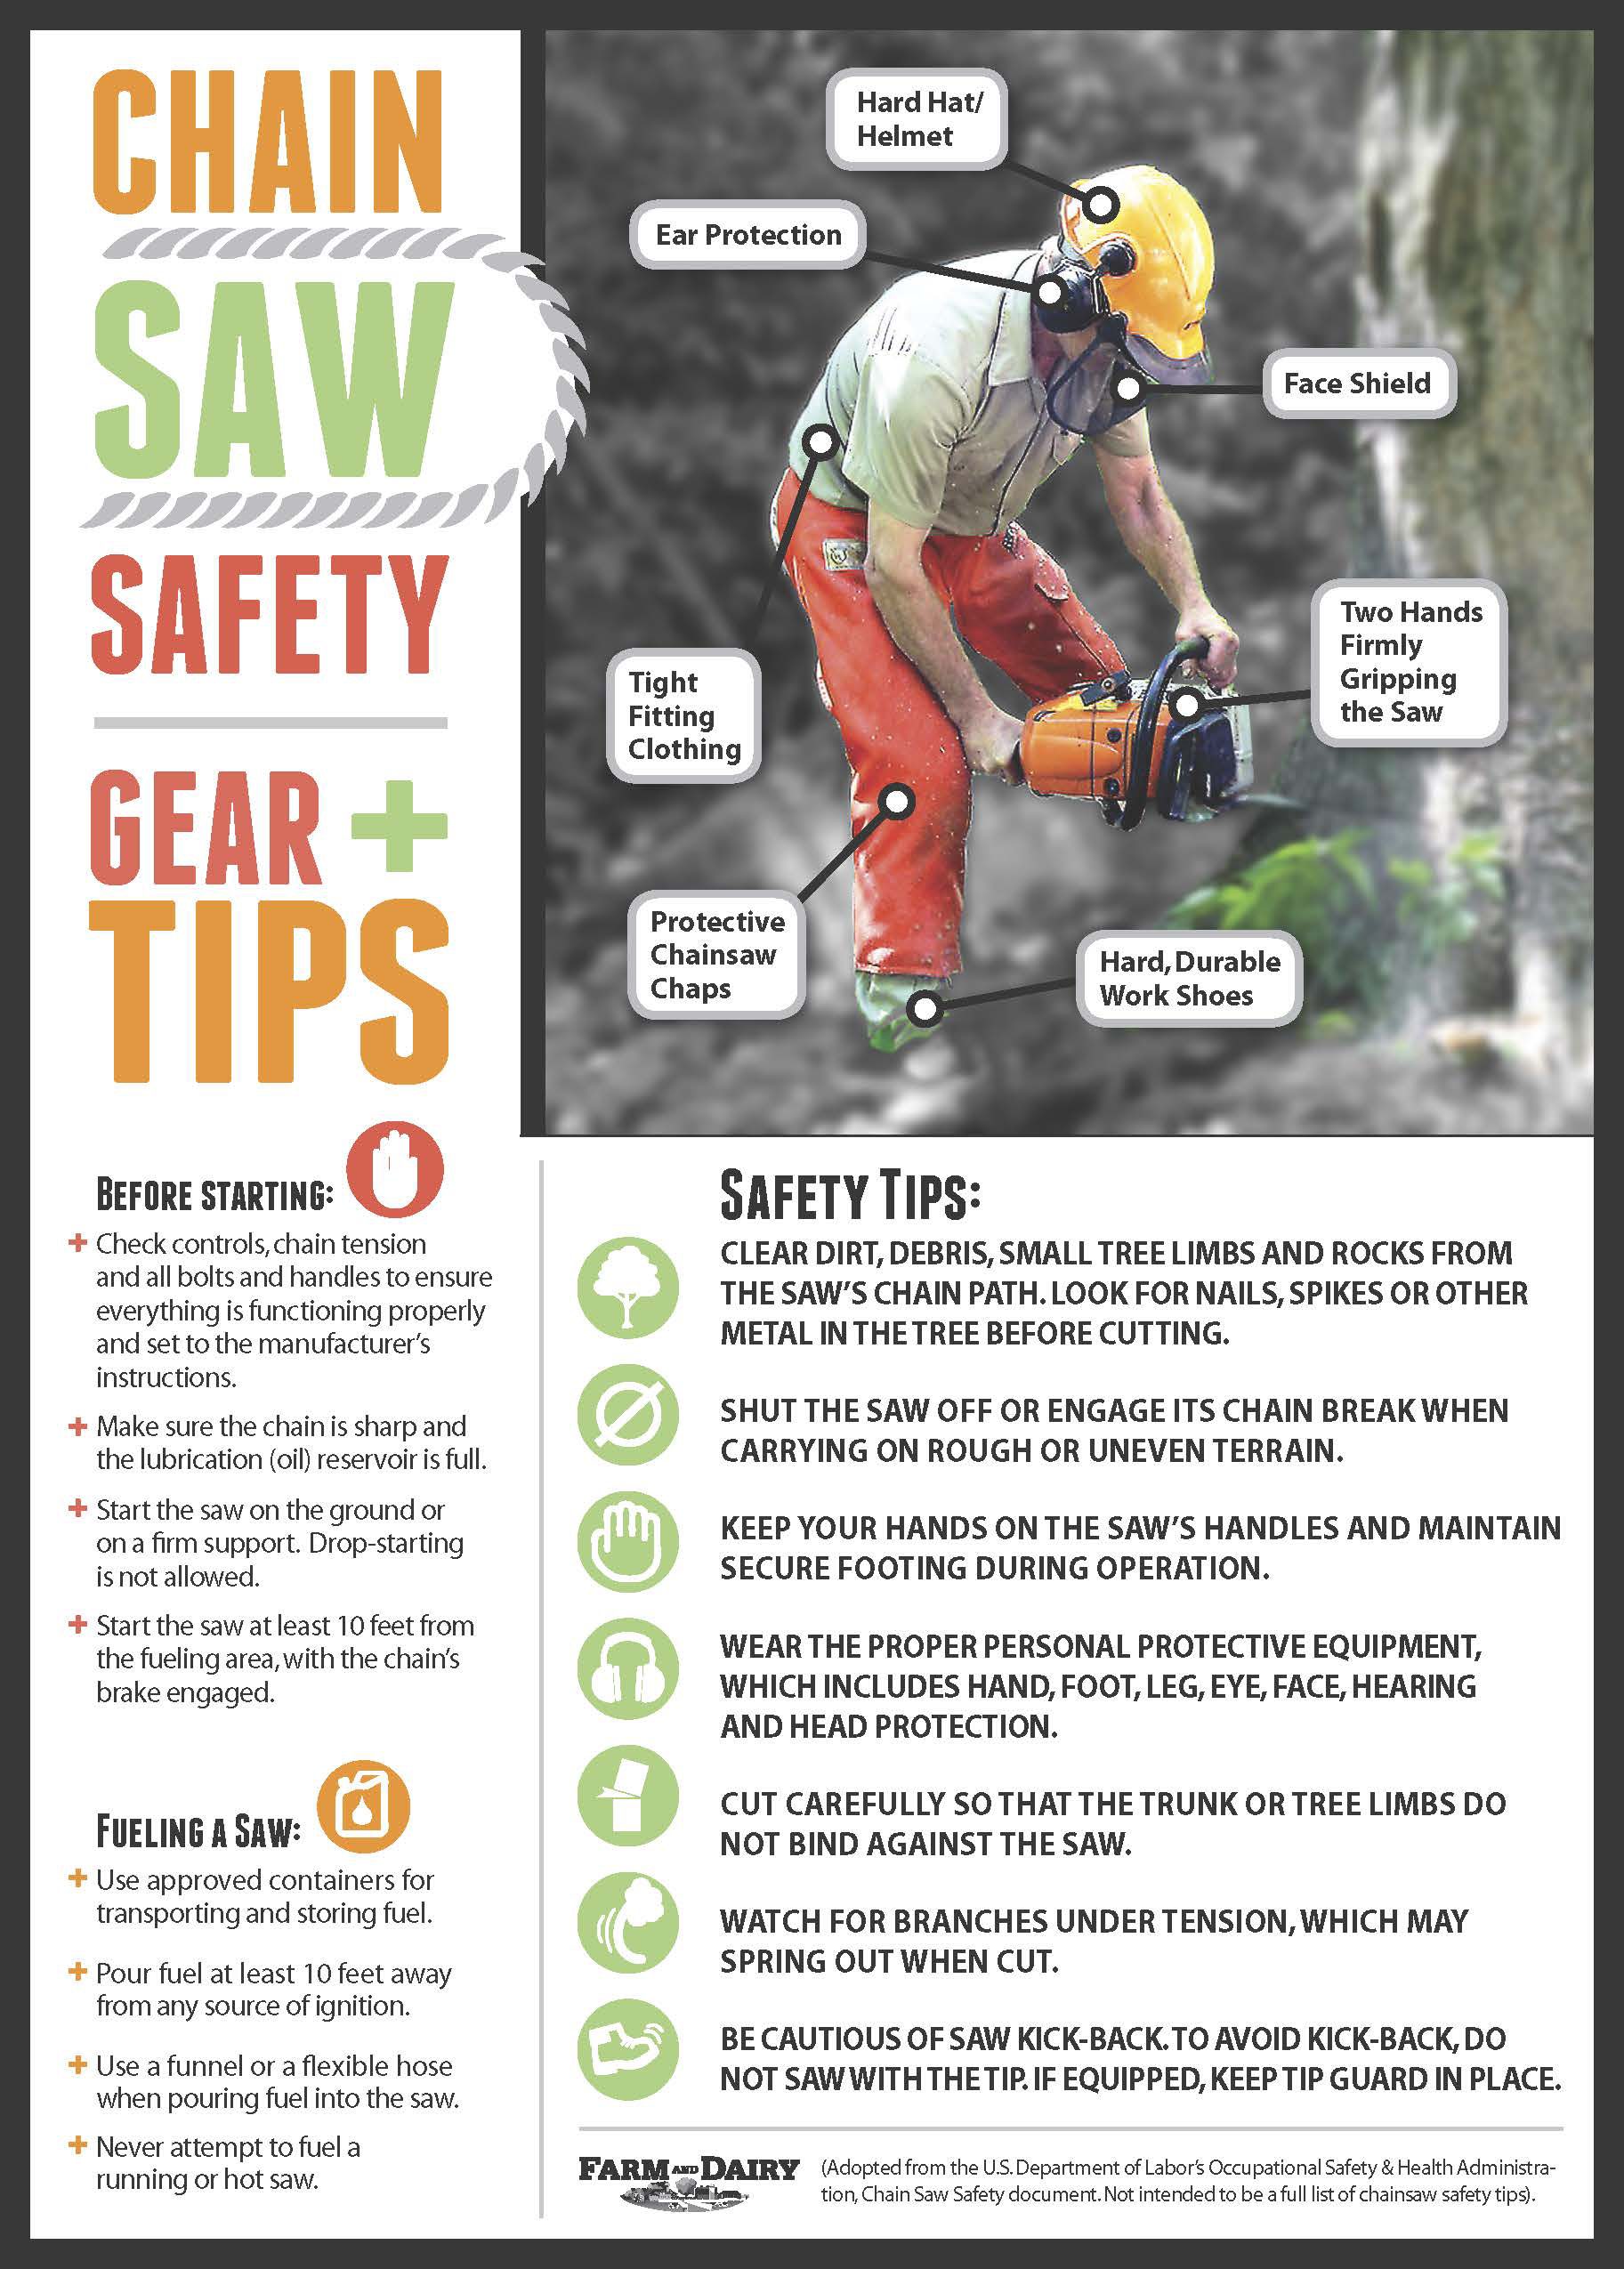 Chainsaw Safety: How To Use A Chainsaw Safely - Which?